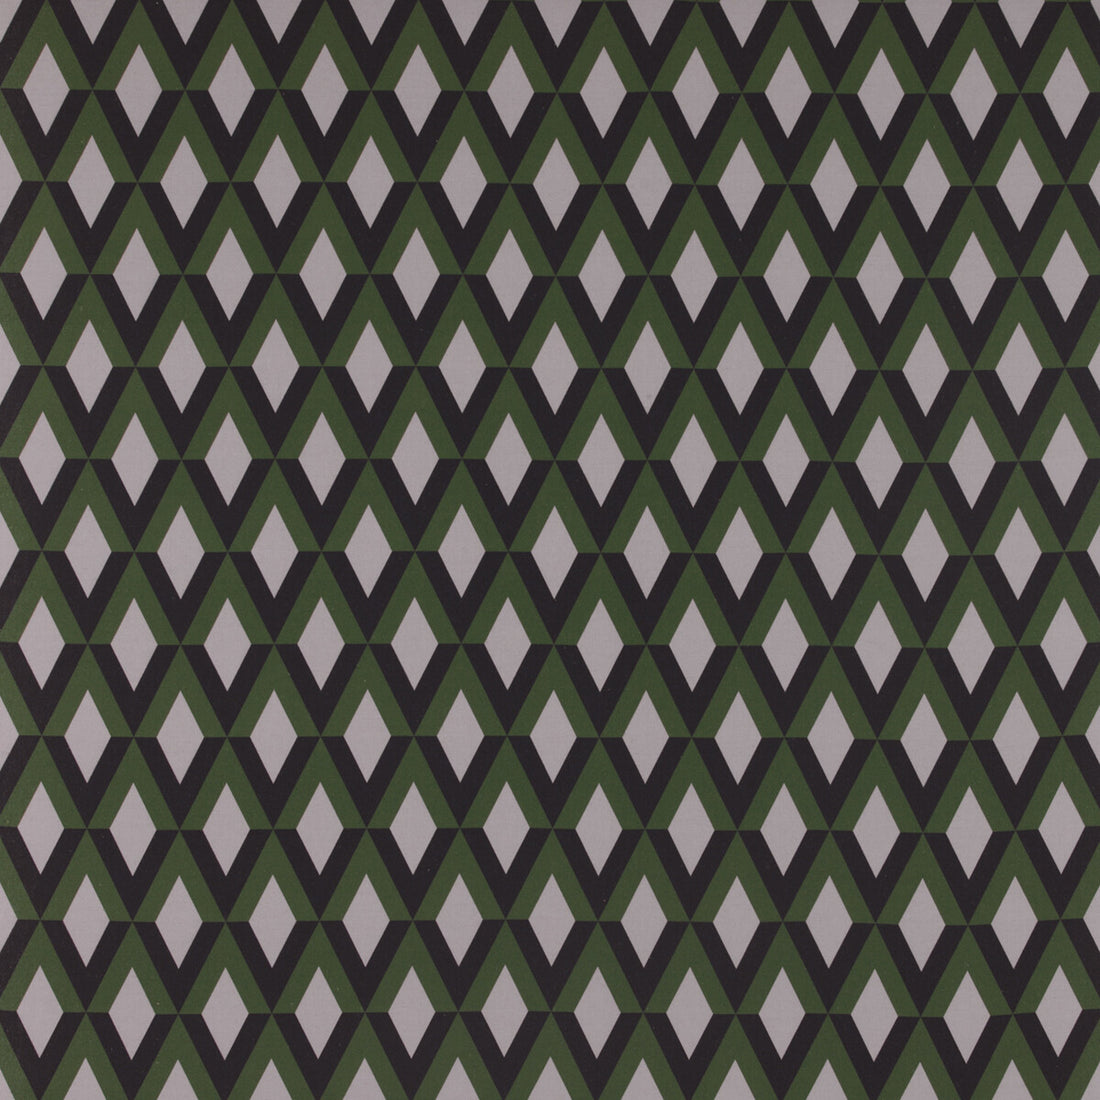 Prati fabric in verde color - pattern GDT5339.001.0 - by Gaston y Daniela in the Tierras collection